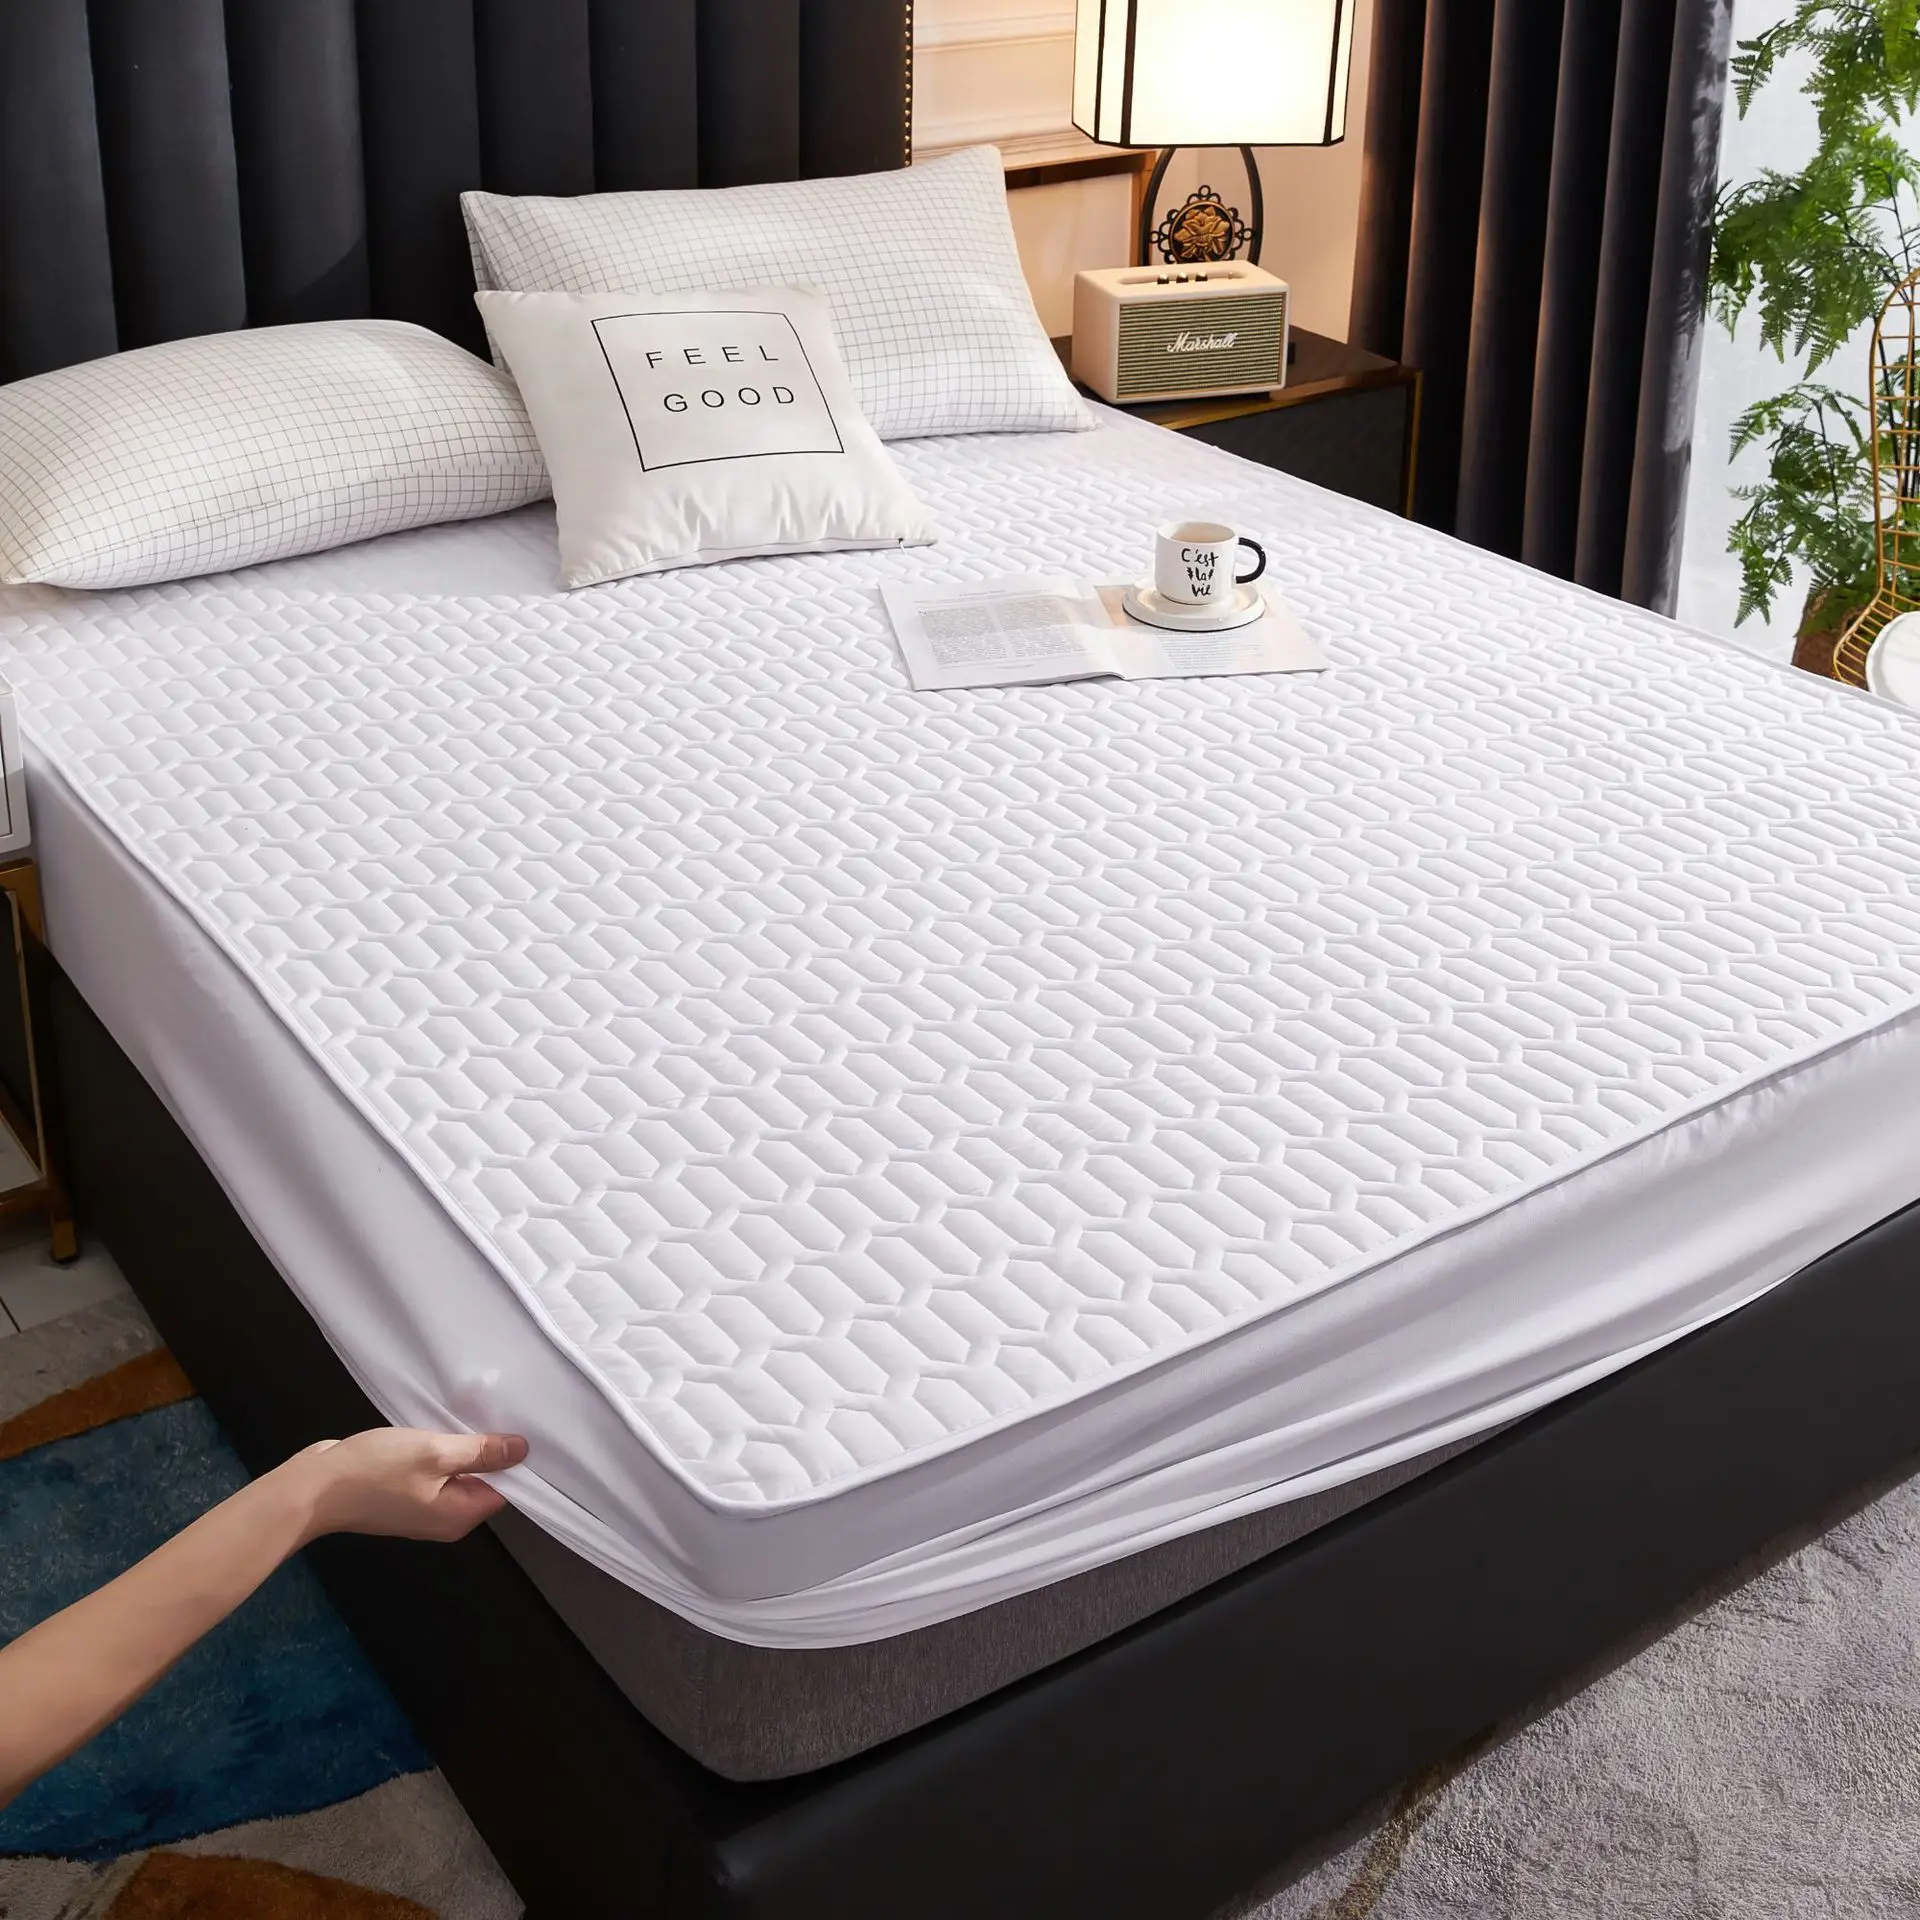 

Waterproof Mattress Cover Thicken Mattress Protector Skin-Friendly Durable Fitted Sheet Bed Cover 150x200 180x200 160x200